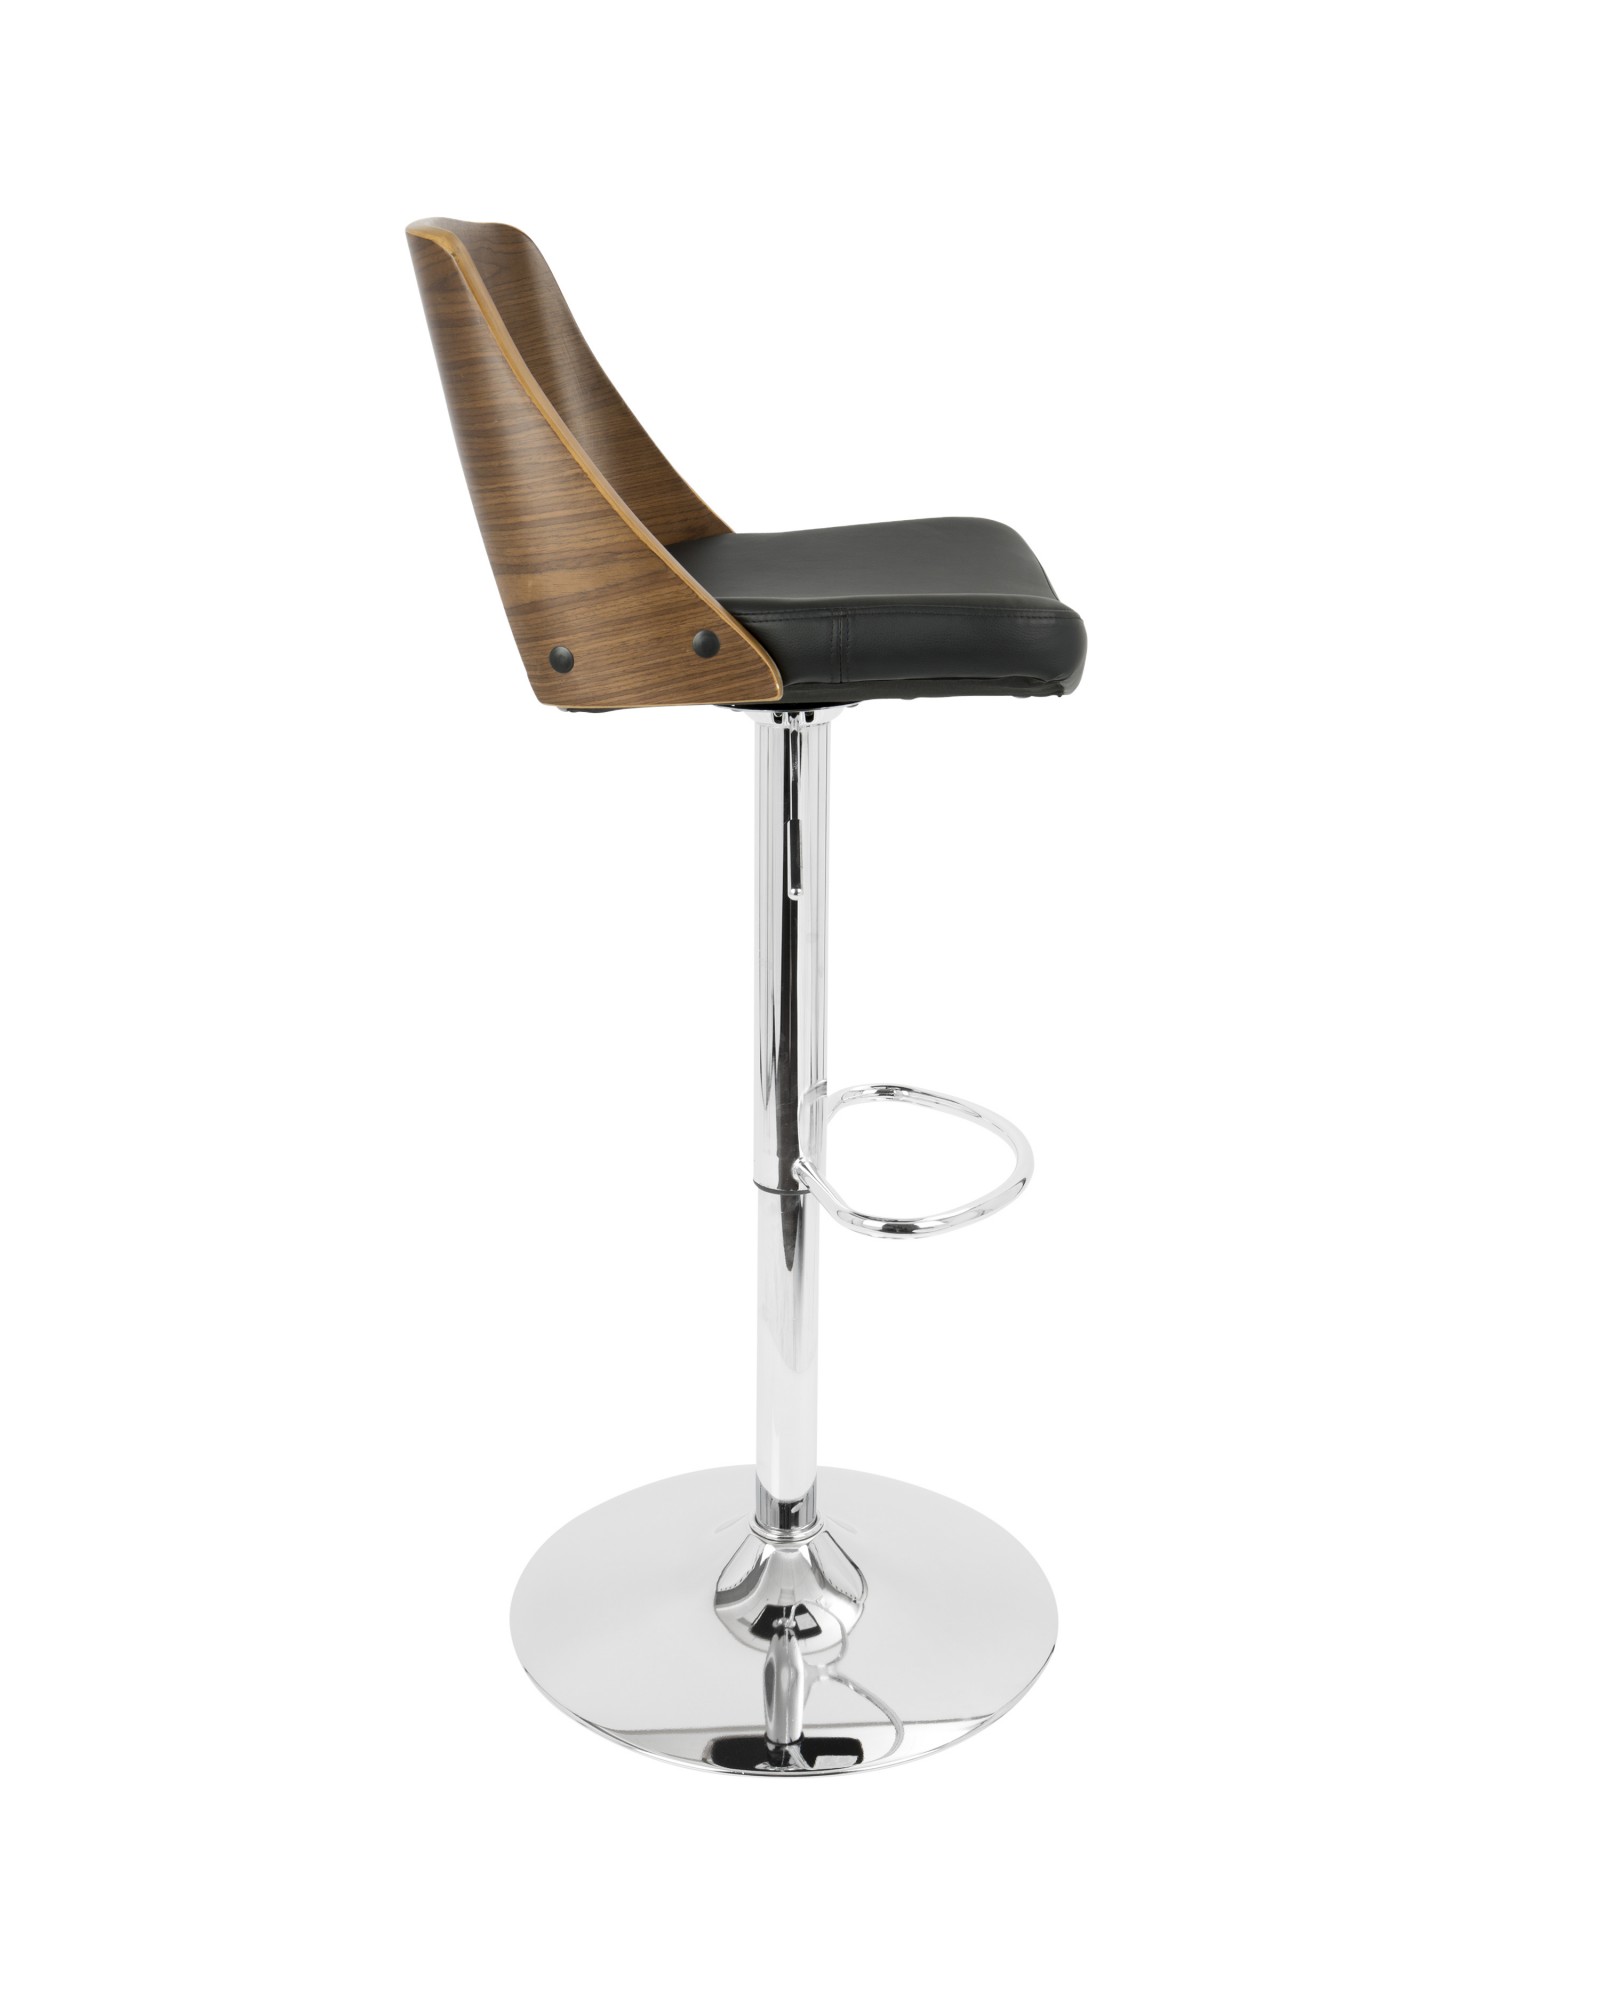 Valencia Mid-Century Modern Adjustable Barstool with Swivel in Walnut and Black Faux Leather